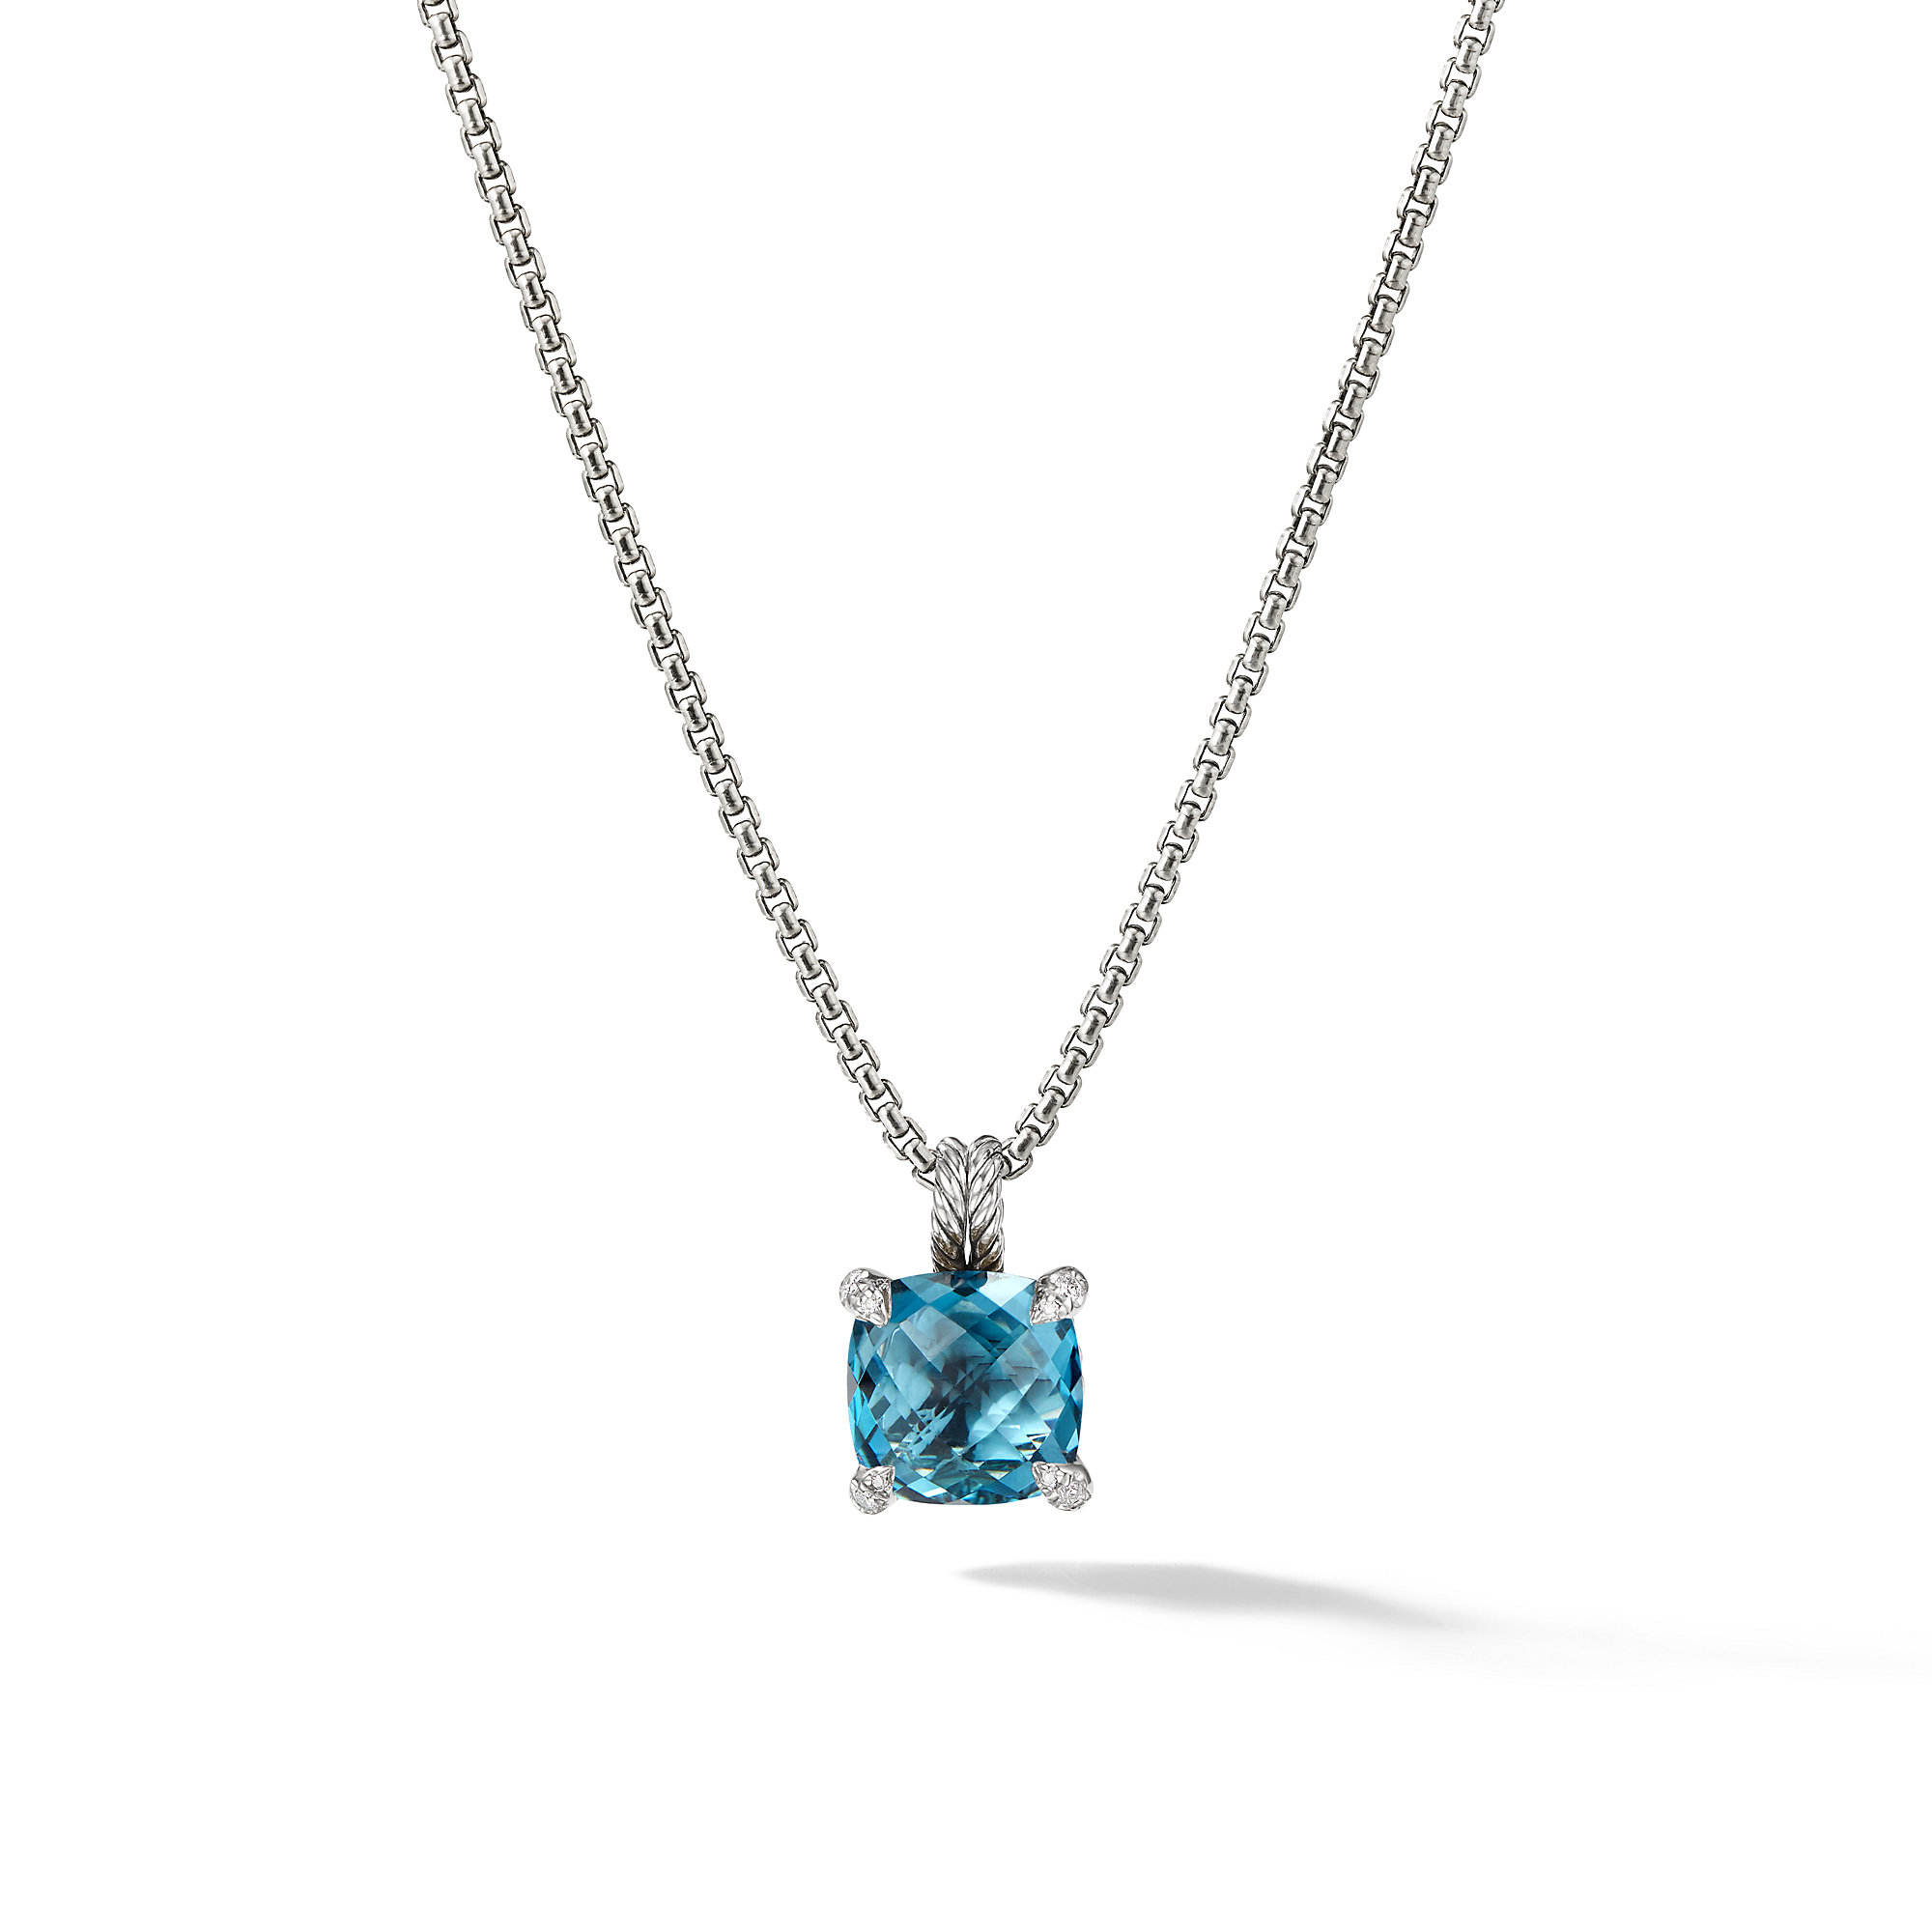 Chatelaine® Pendant Necklace in Sterling Silver with Hampton Blue Topaz and Pave Diamonds